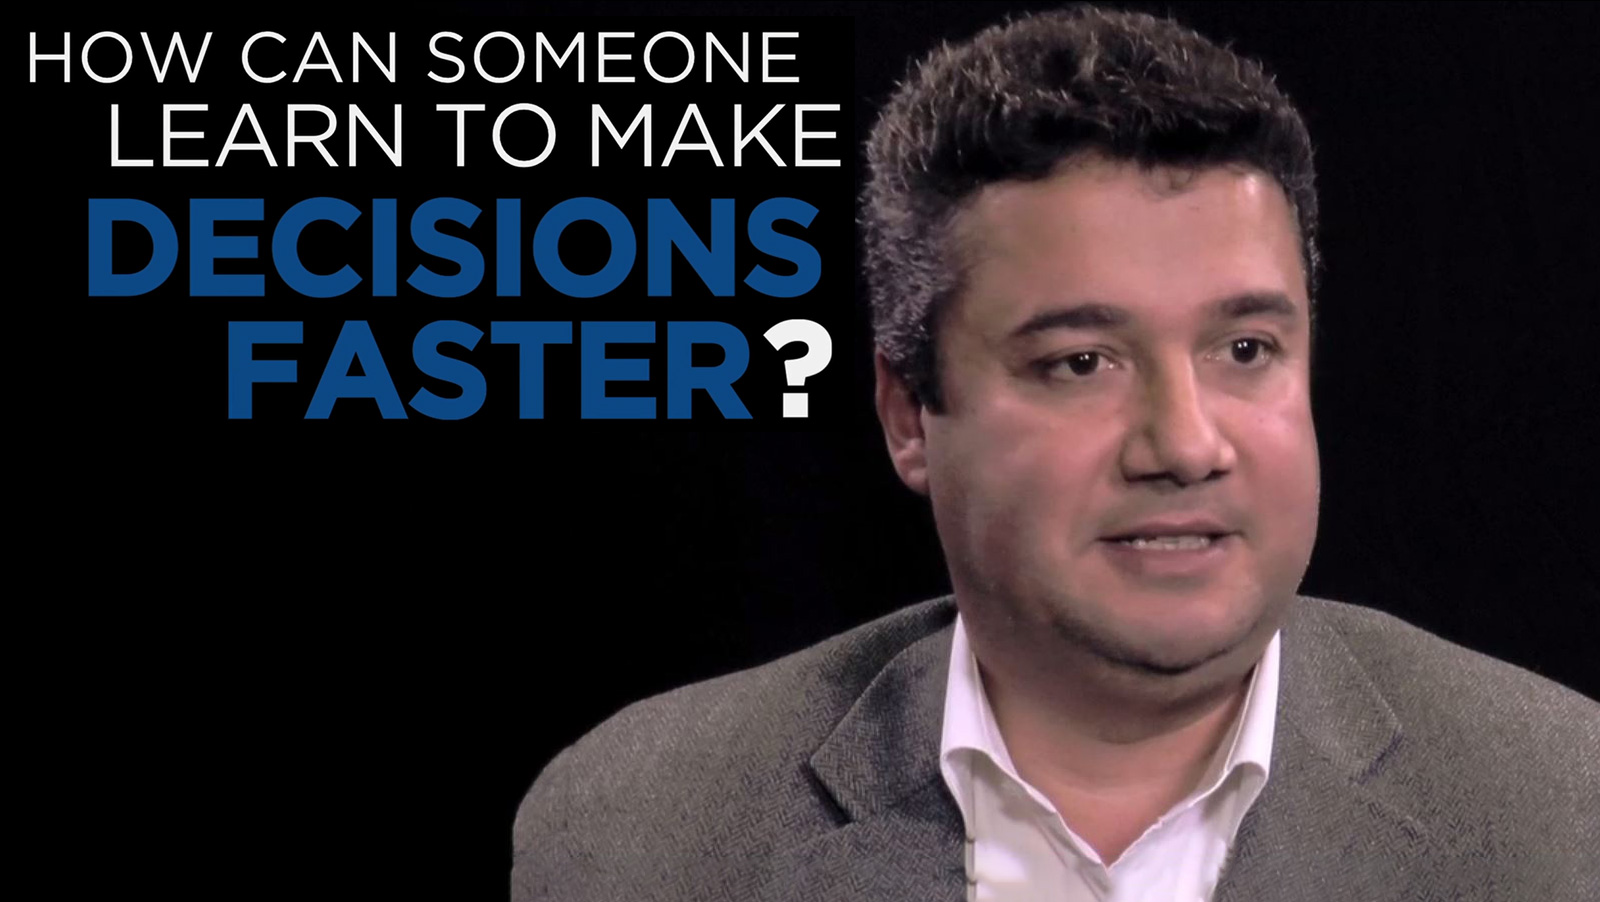 Hussein Chahine: Shared Experience - How can someone learn to make decisions faster?